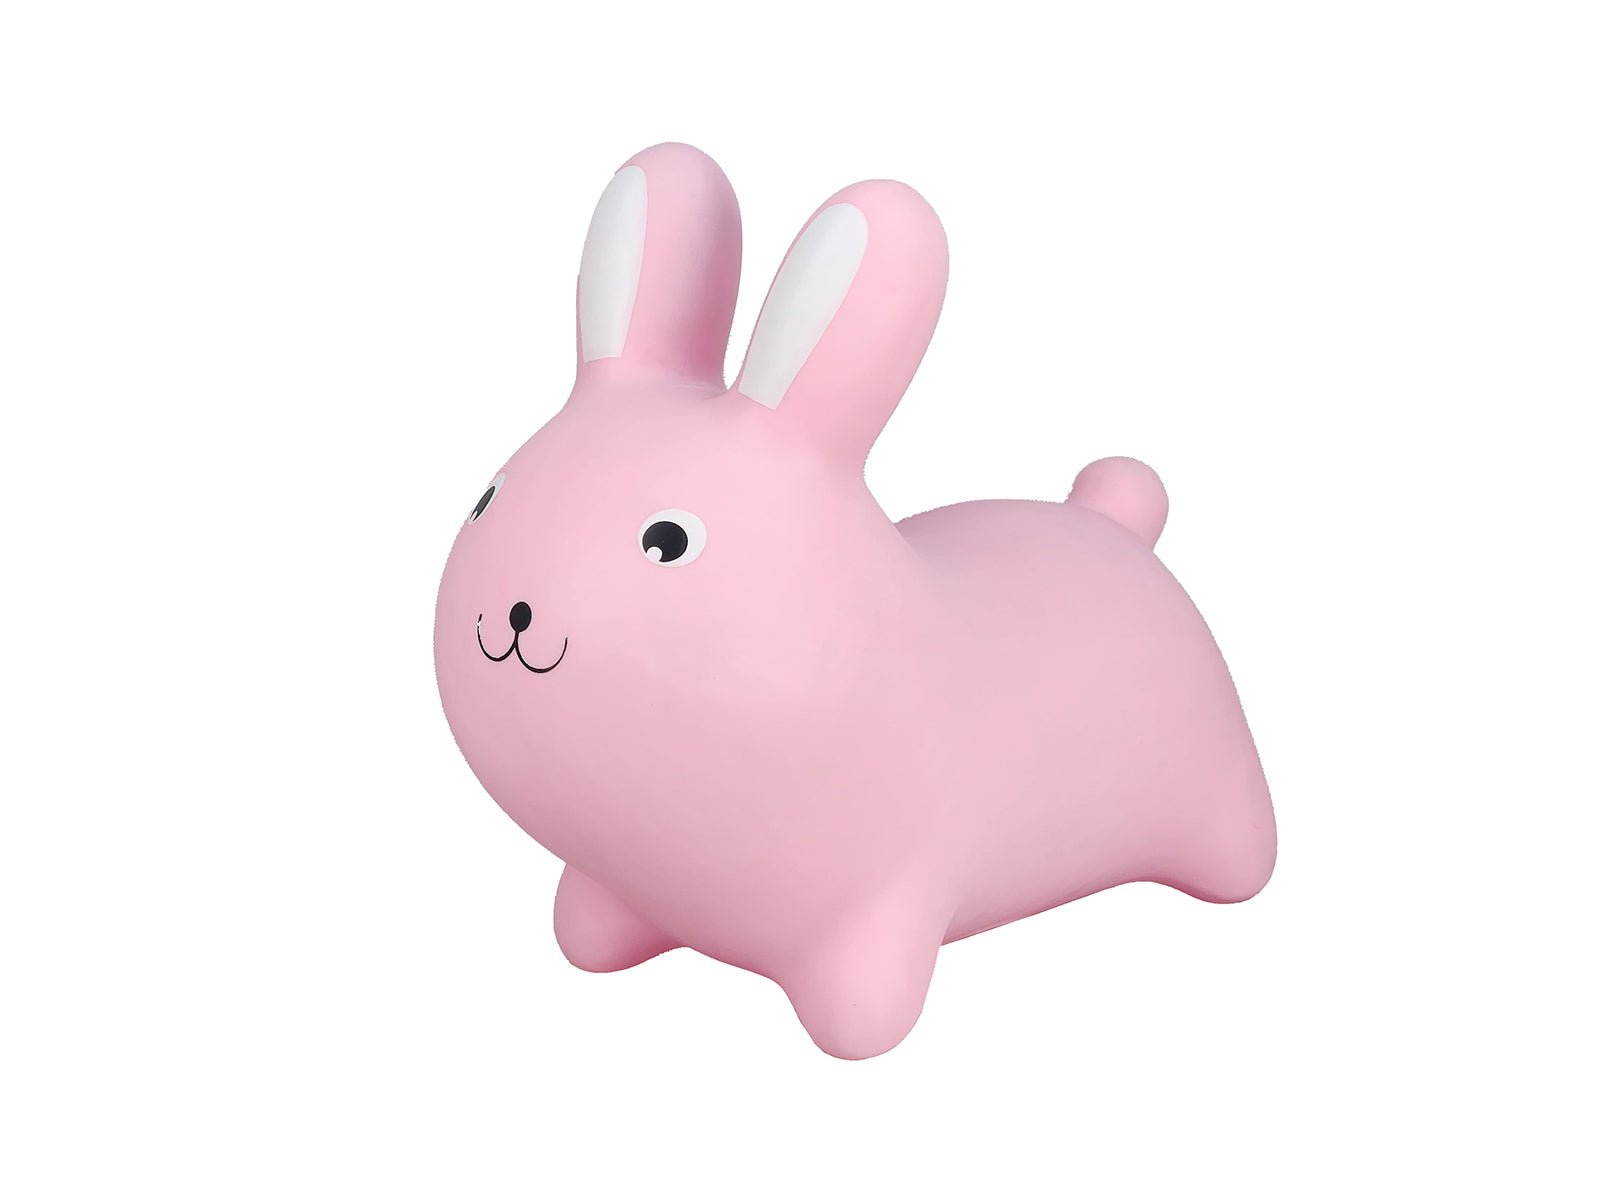 Discover Endless Adventures with Bouncy Rider Bubblegum The Rabbit - A Captivating Ride-On Toy for Kids!